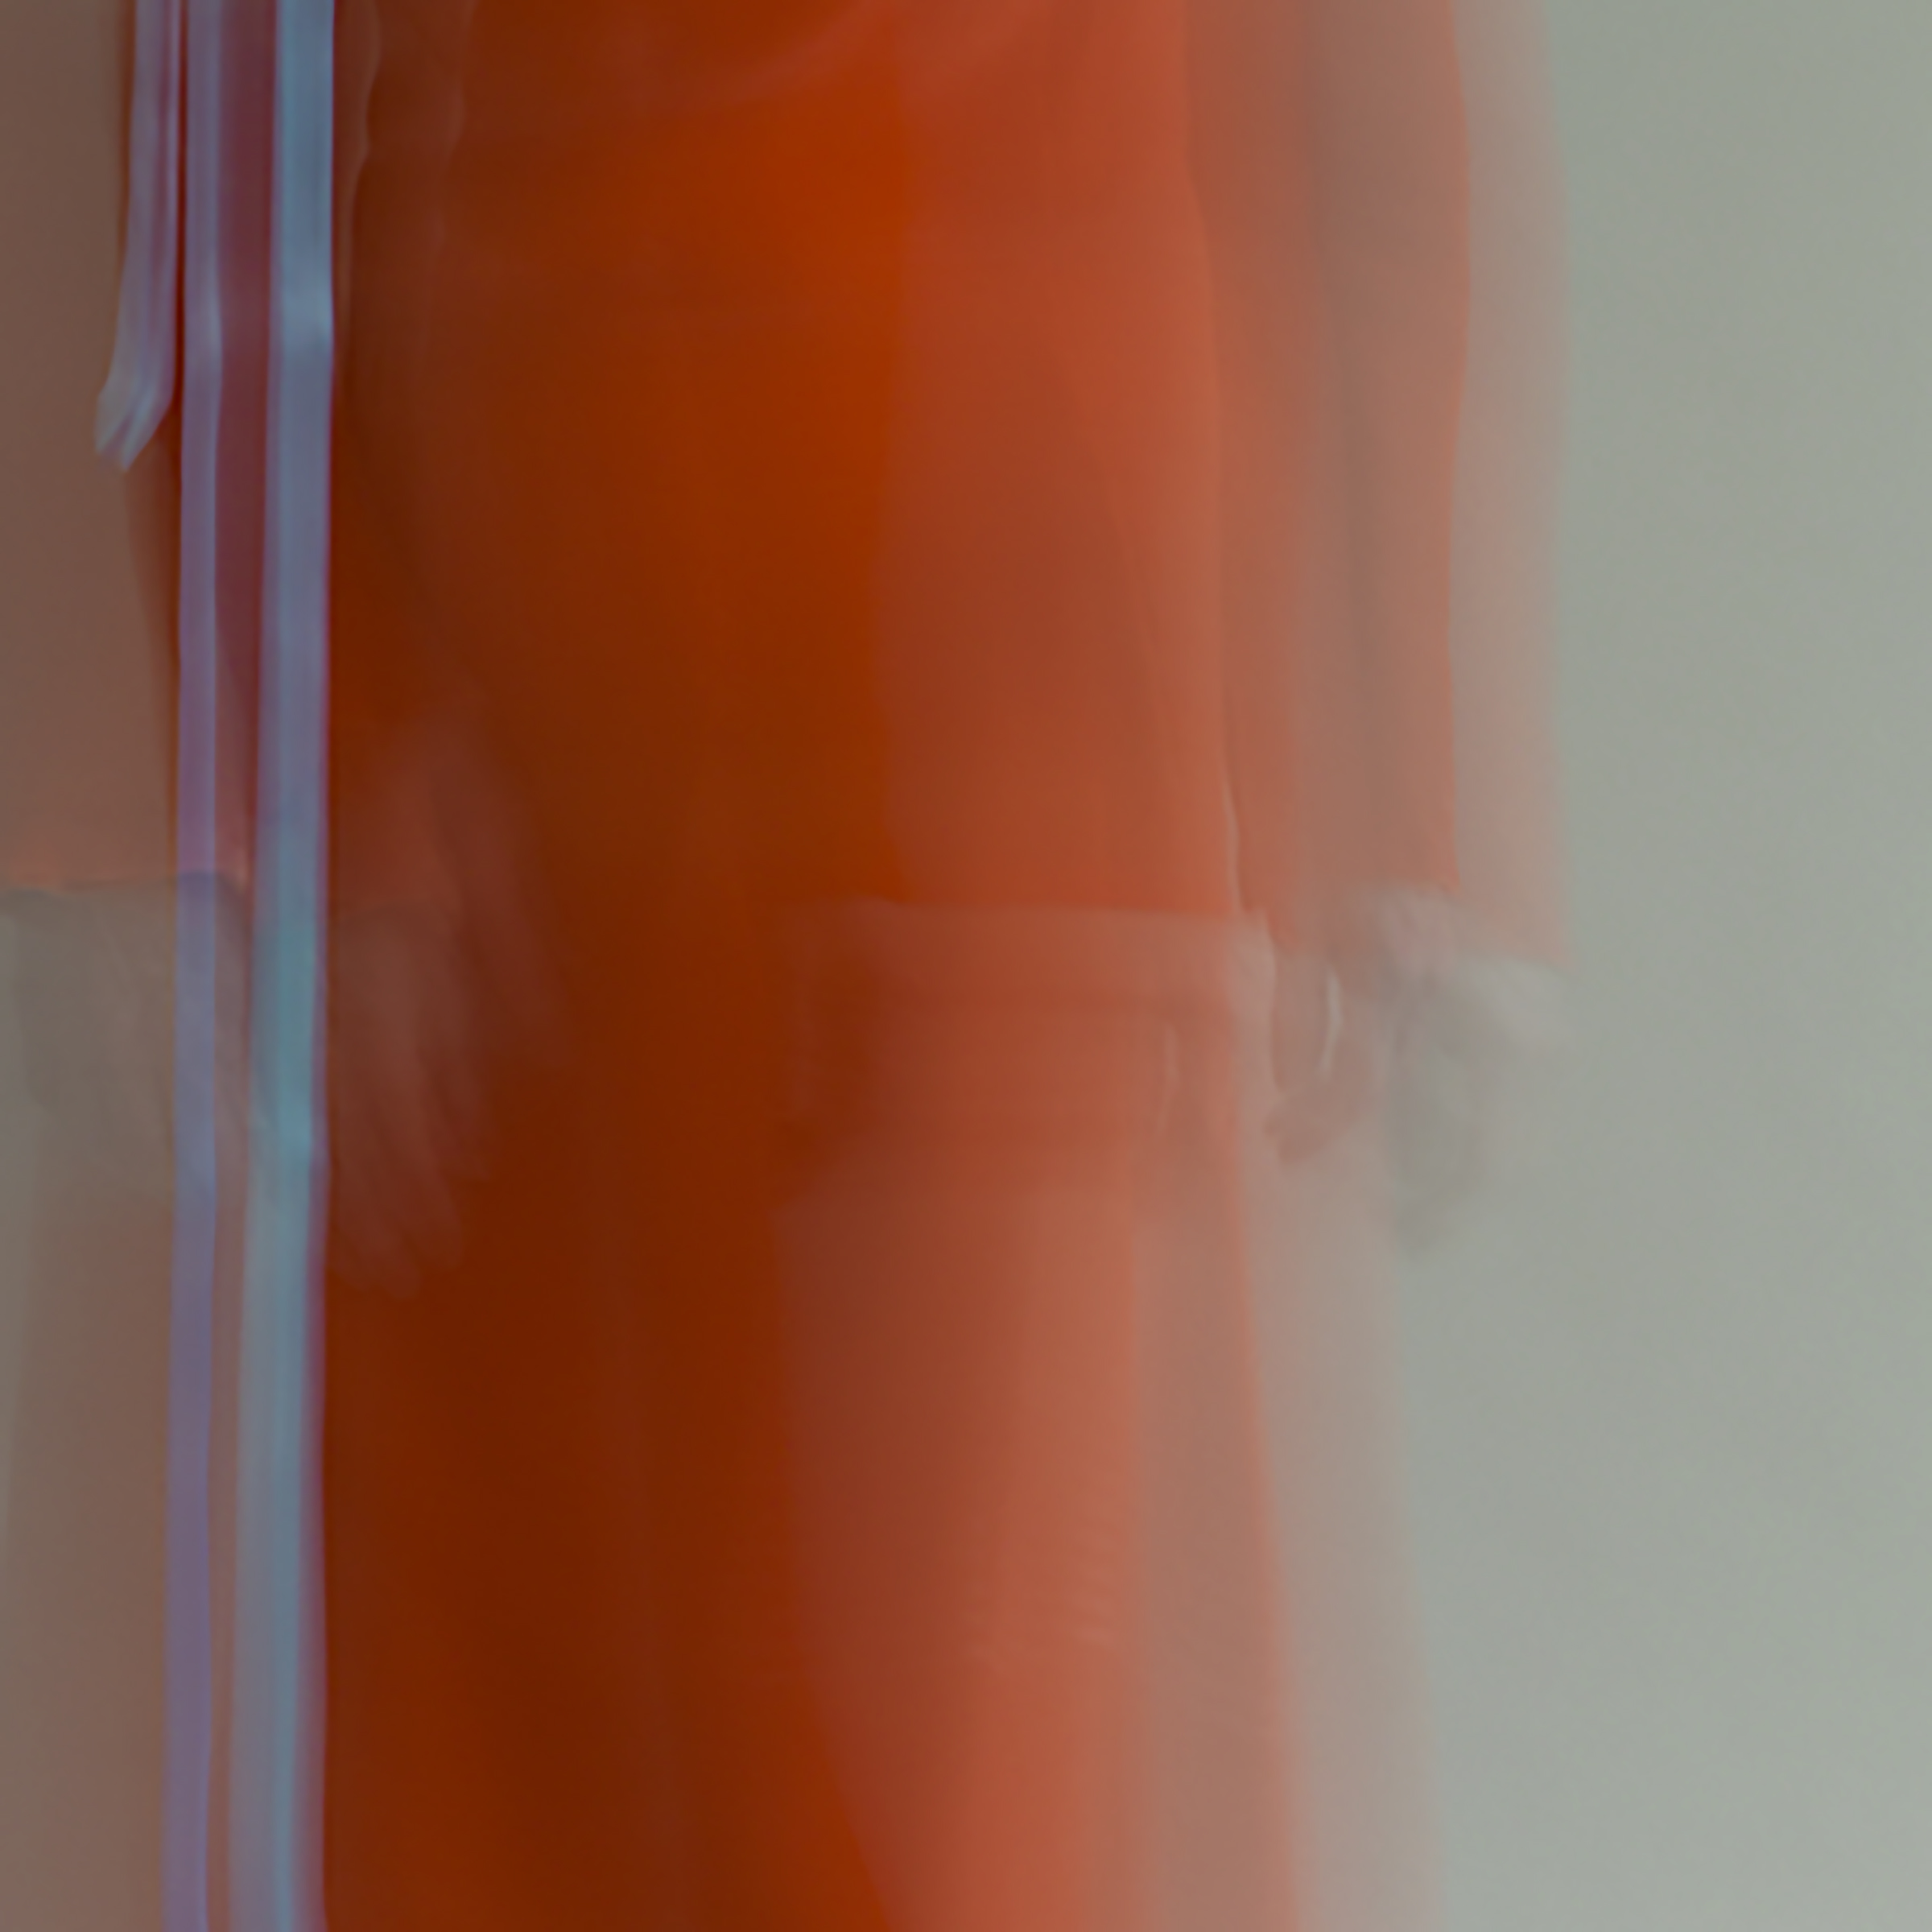   forms of things, 11 , 2014 20 x 20 in. Archival pigment print on Canson paper Edition of 5 